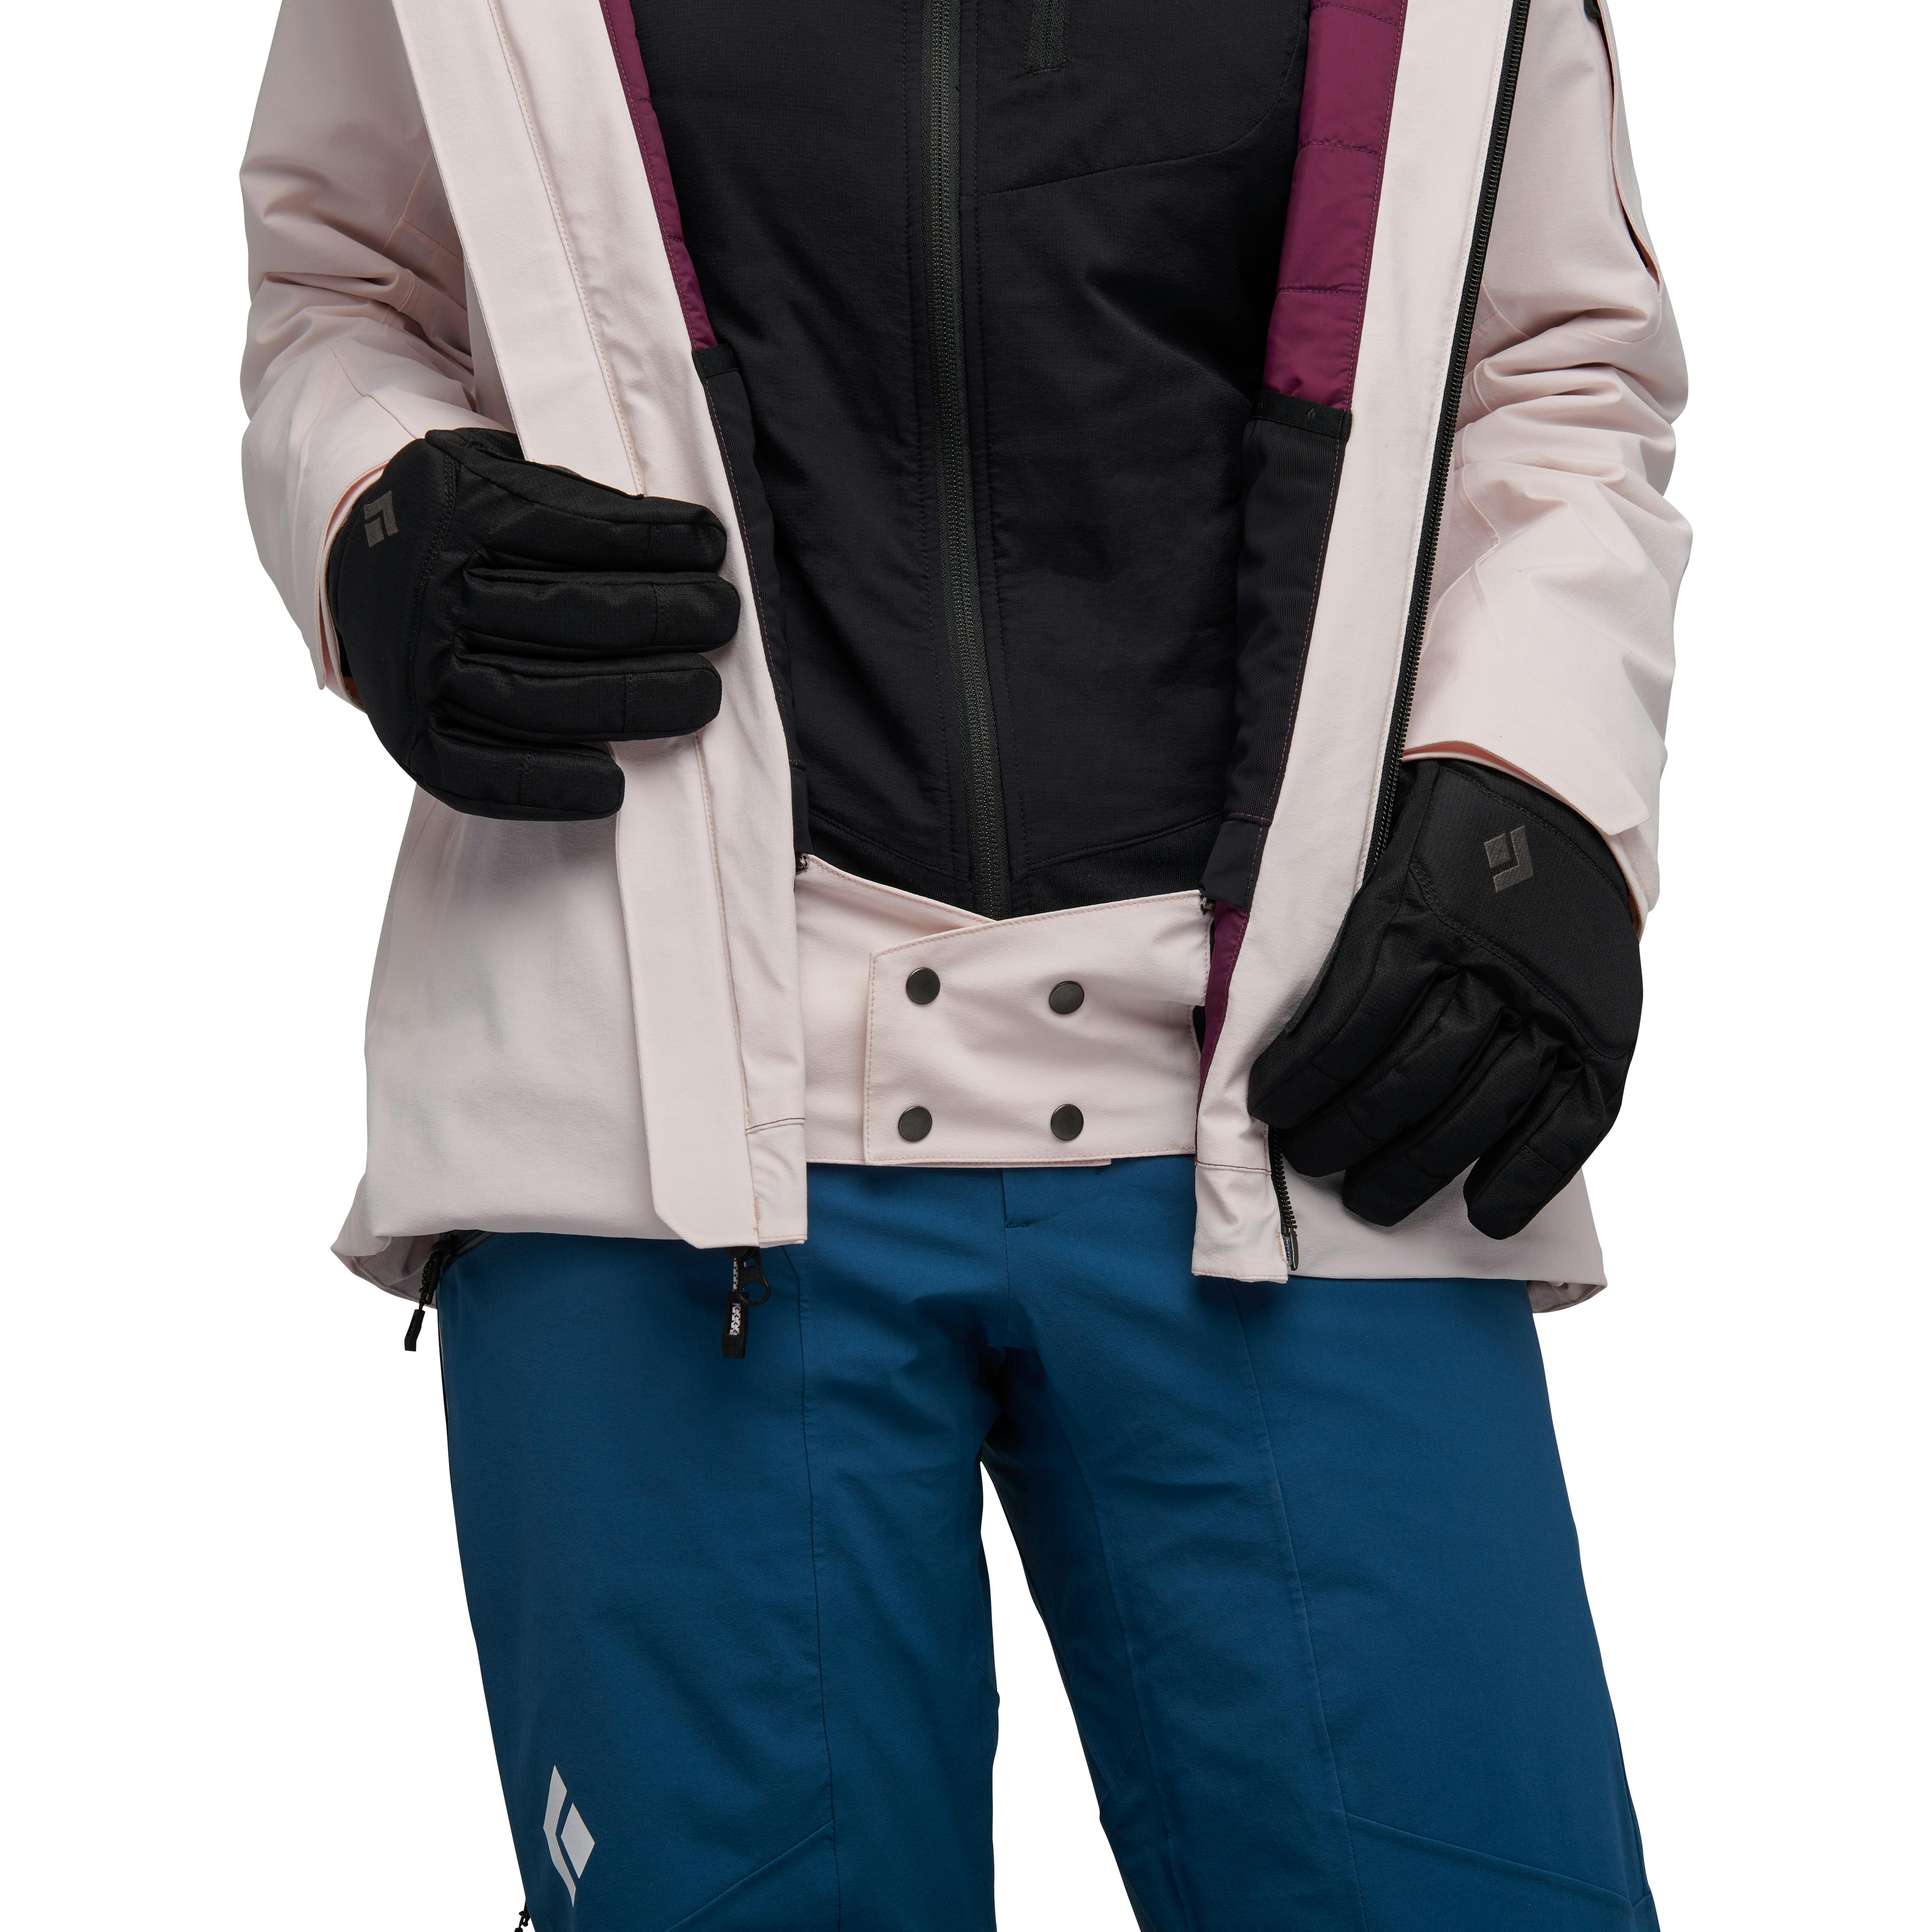 A model adjusts the open of her pink Recon Insulated Jacket